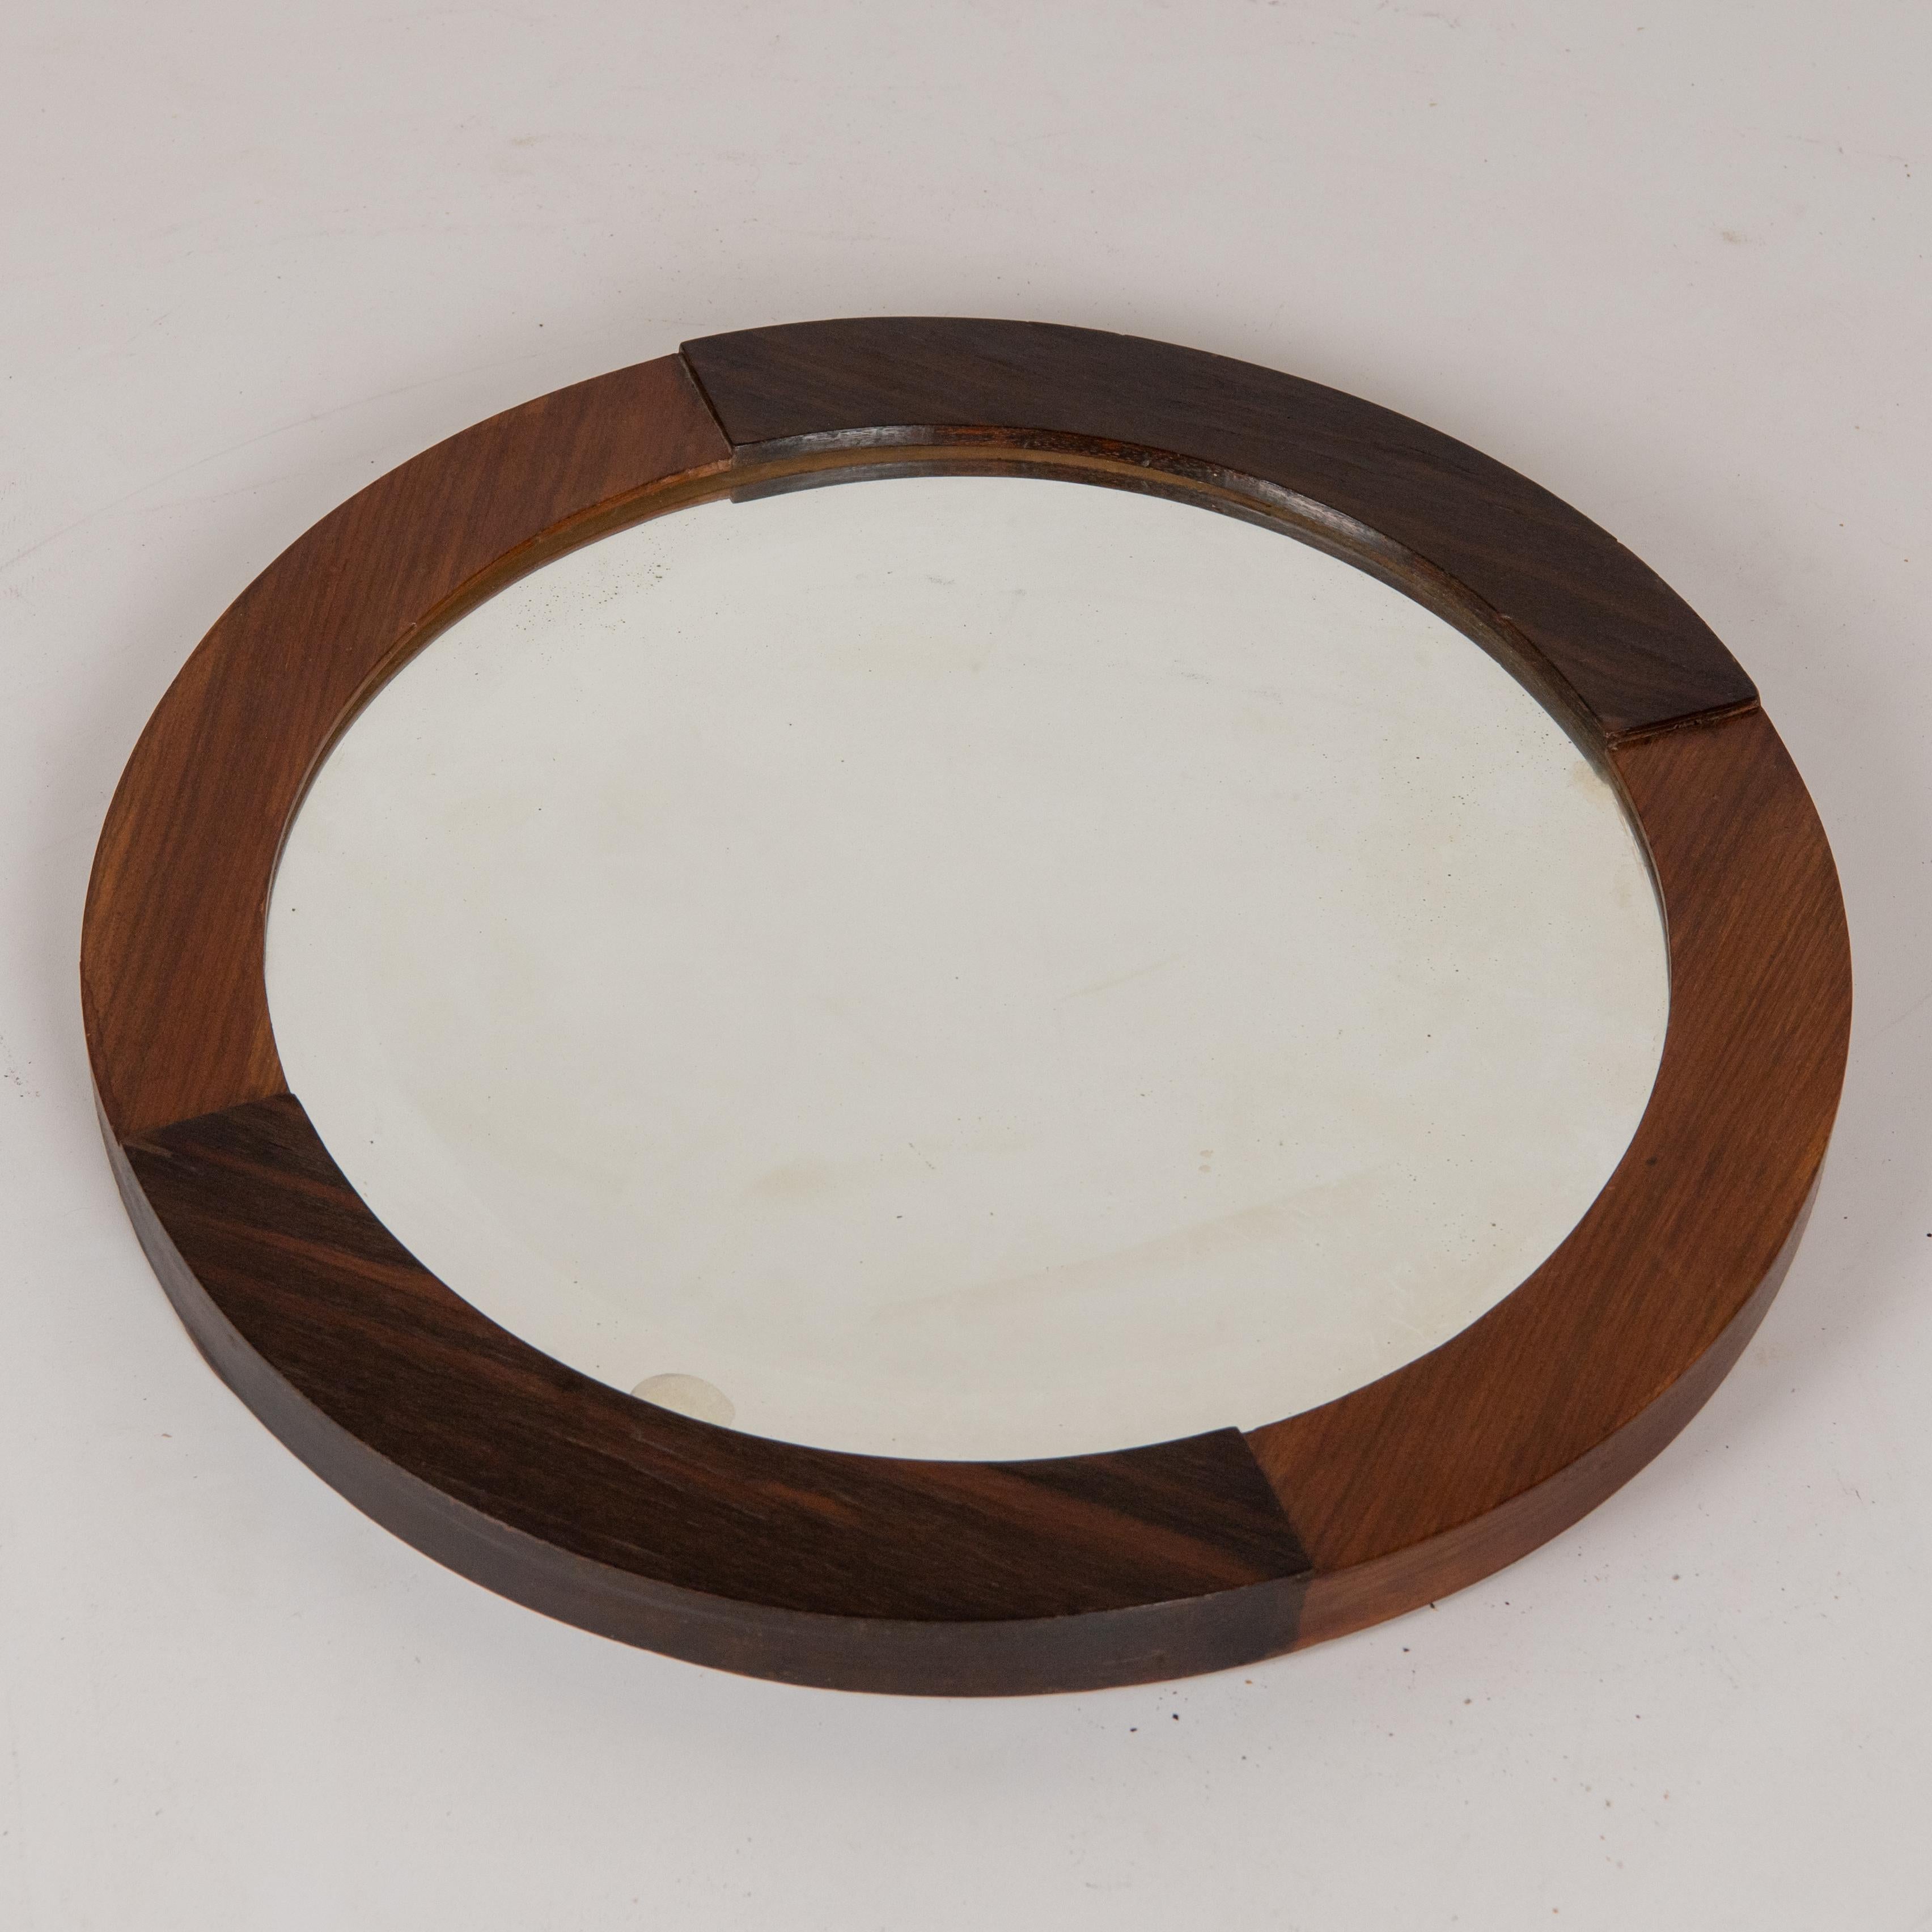 Vintage Round Wall Mirror, Italy 1950s.
1940s vintage round mirror with two kind wood frame and cut glass mirror. In vry good conditions with some sign of time. Wood has been polished. Beautiful patina on glass.